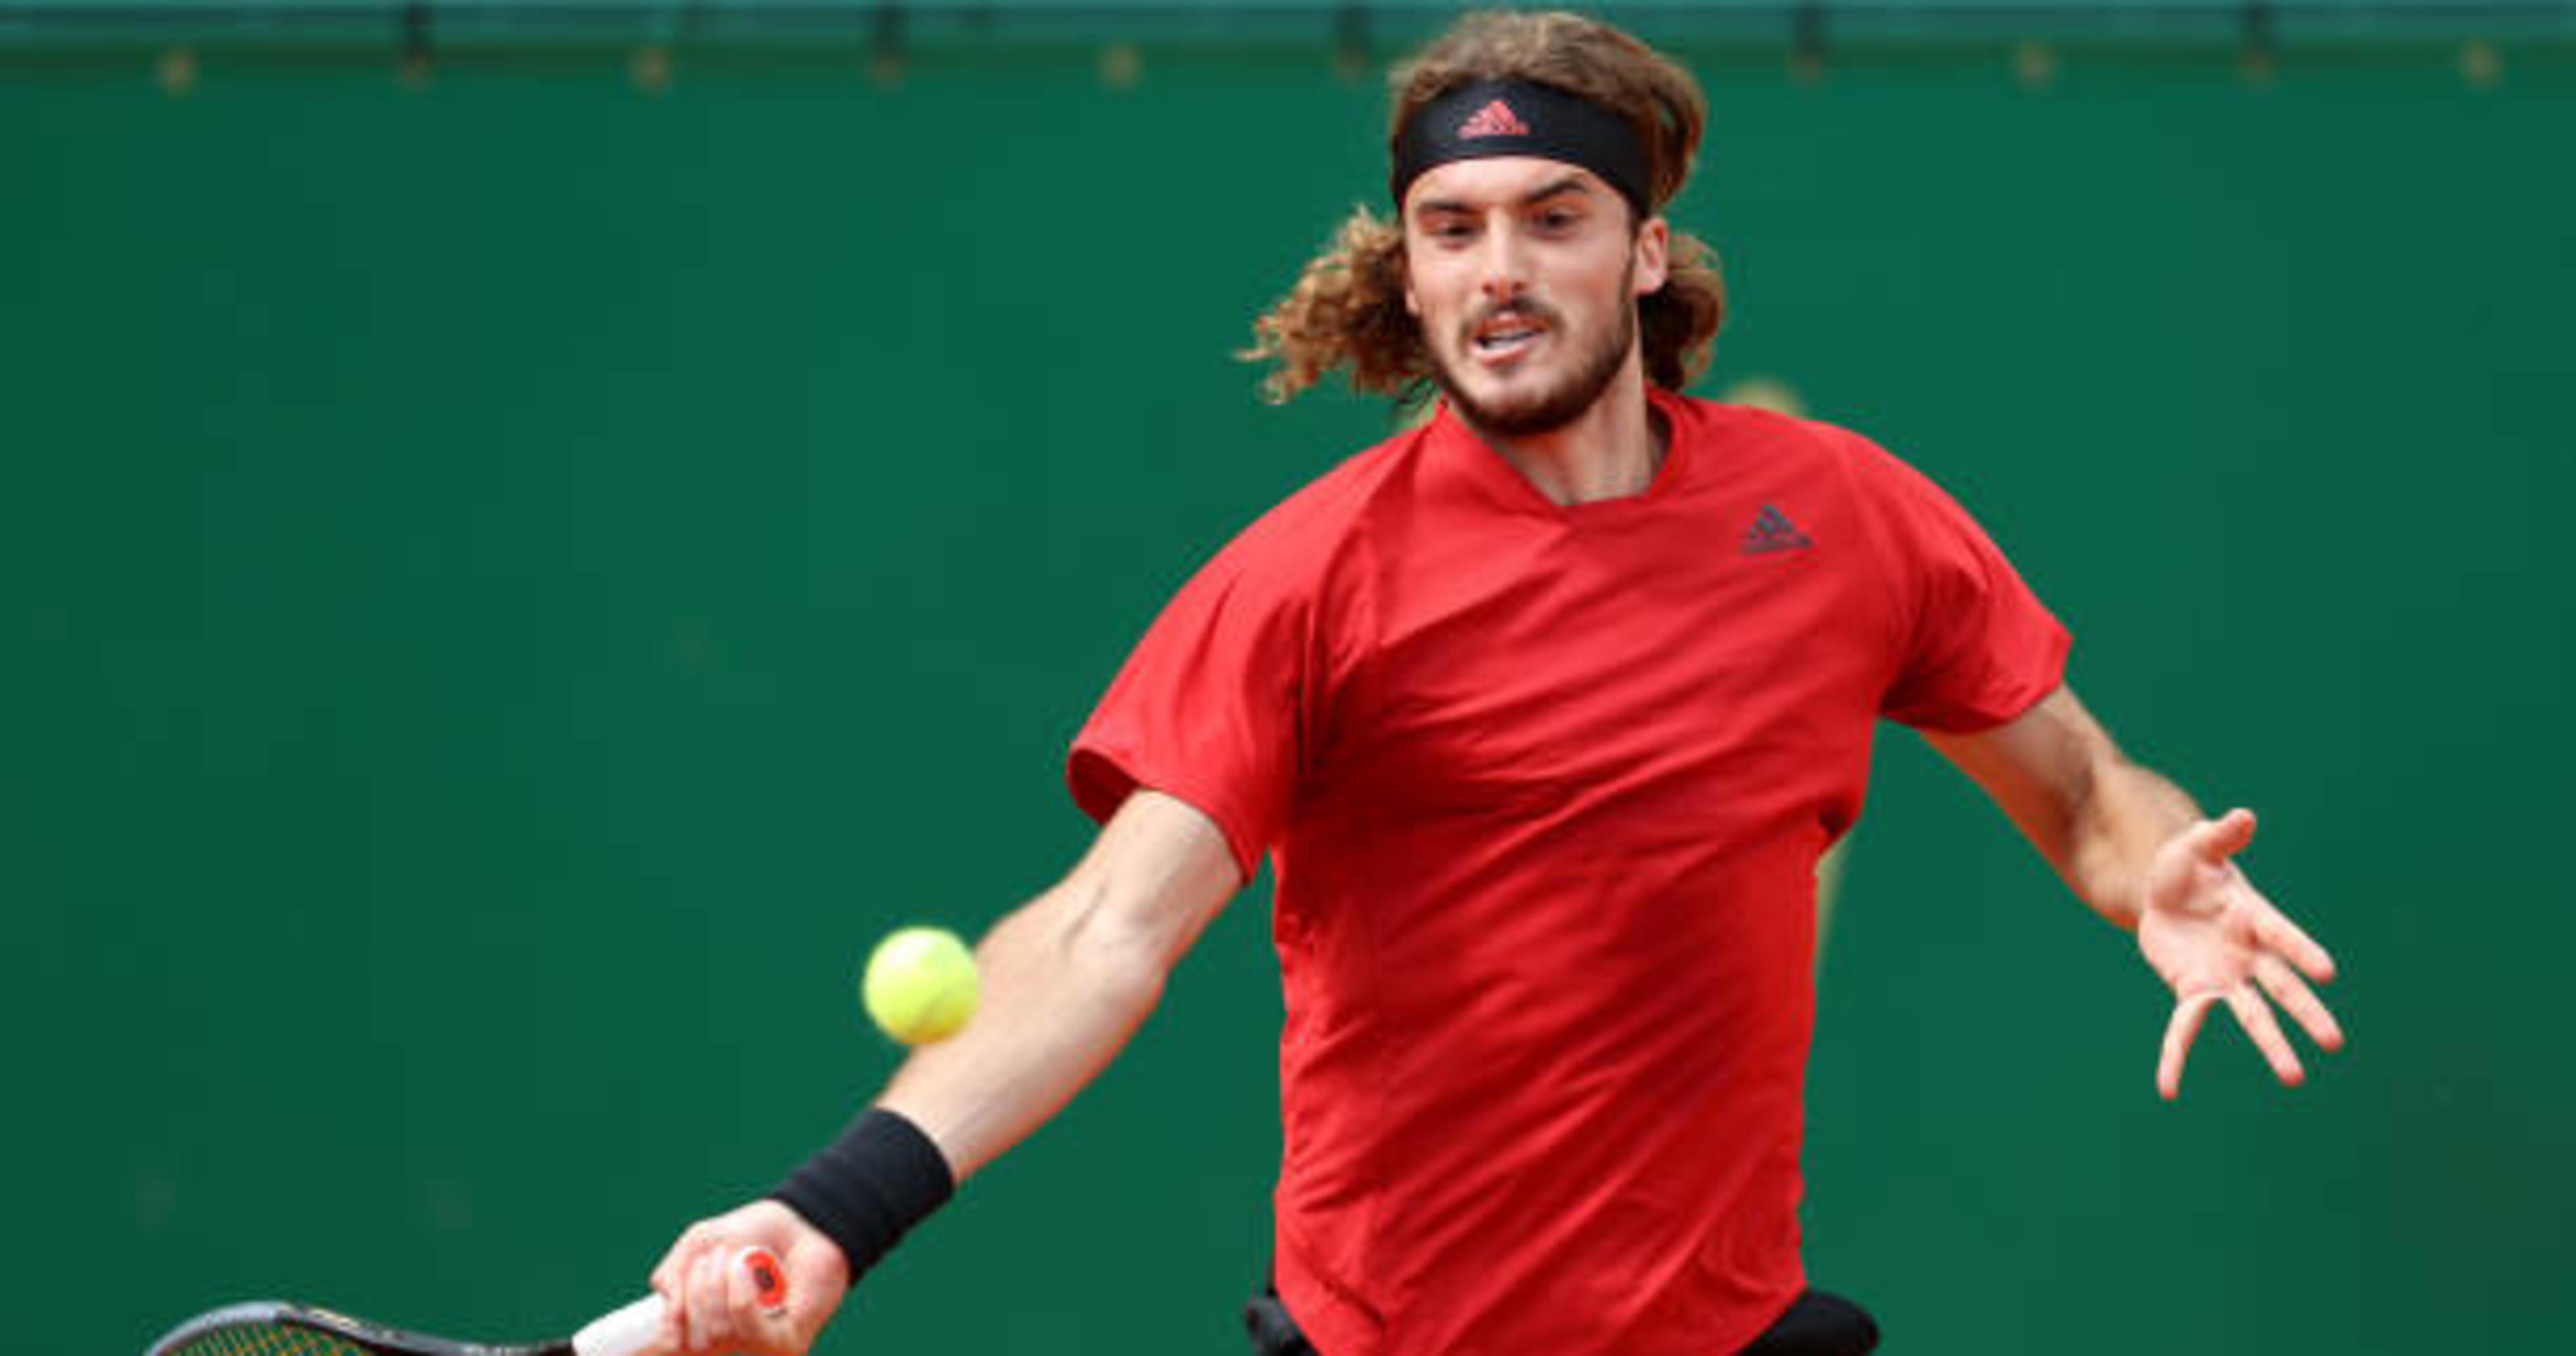 Monte-Carlo Masters 2021 Stefanos Tsitsipas Win Highlights Tuesdays Results News, Scores, Highlights, Stats, and Rumors Bleacher Report